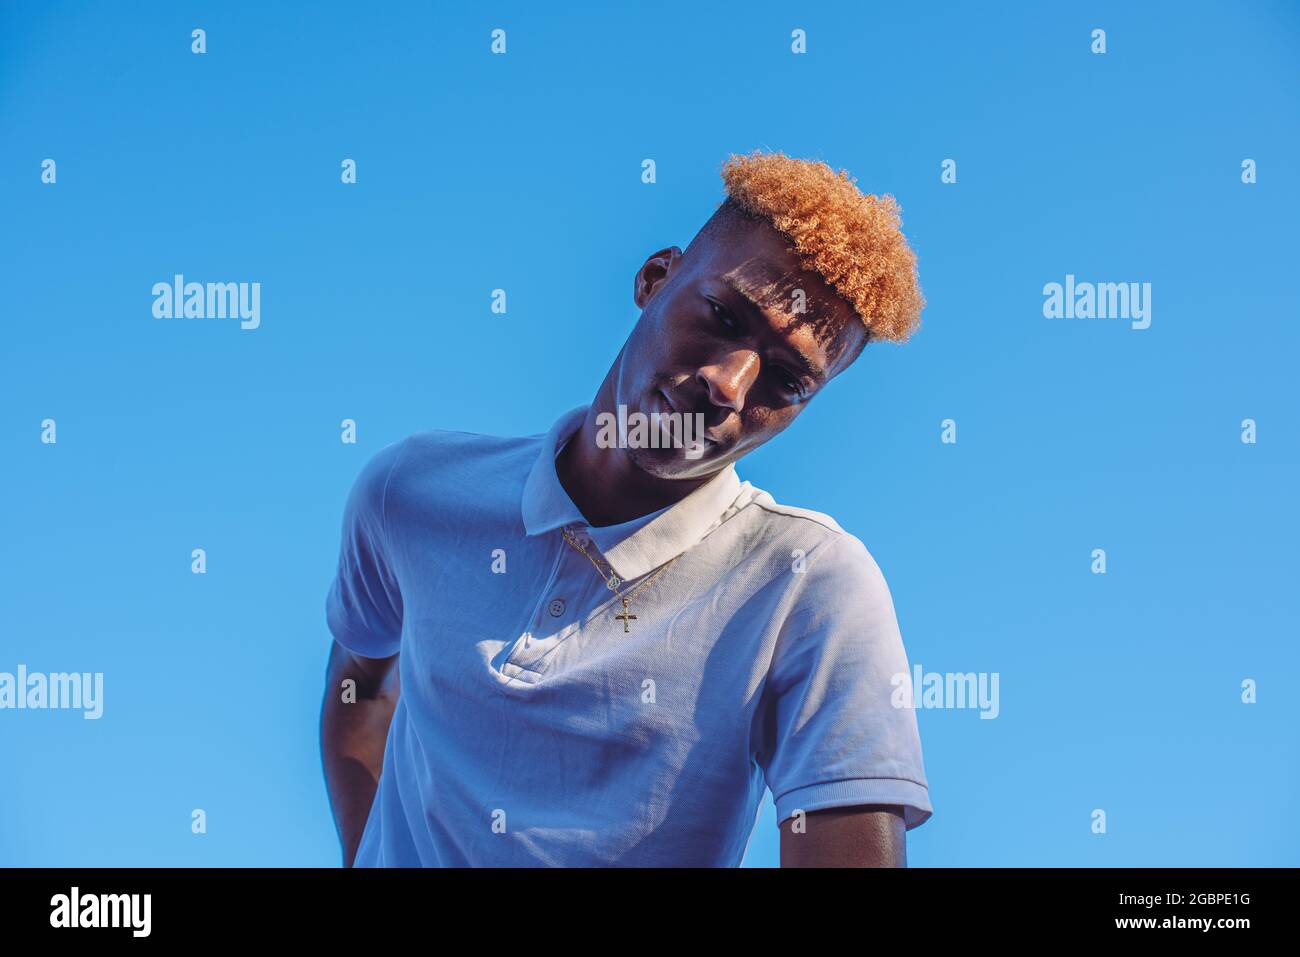 Close up portrait of young man with orange colored hair Stock Photo